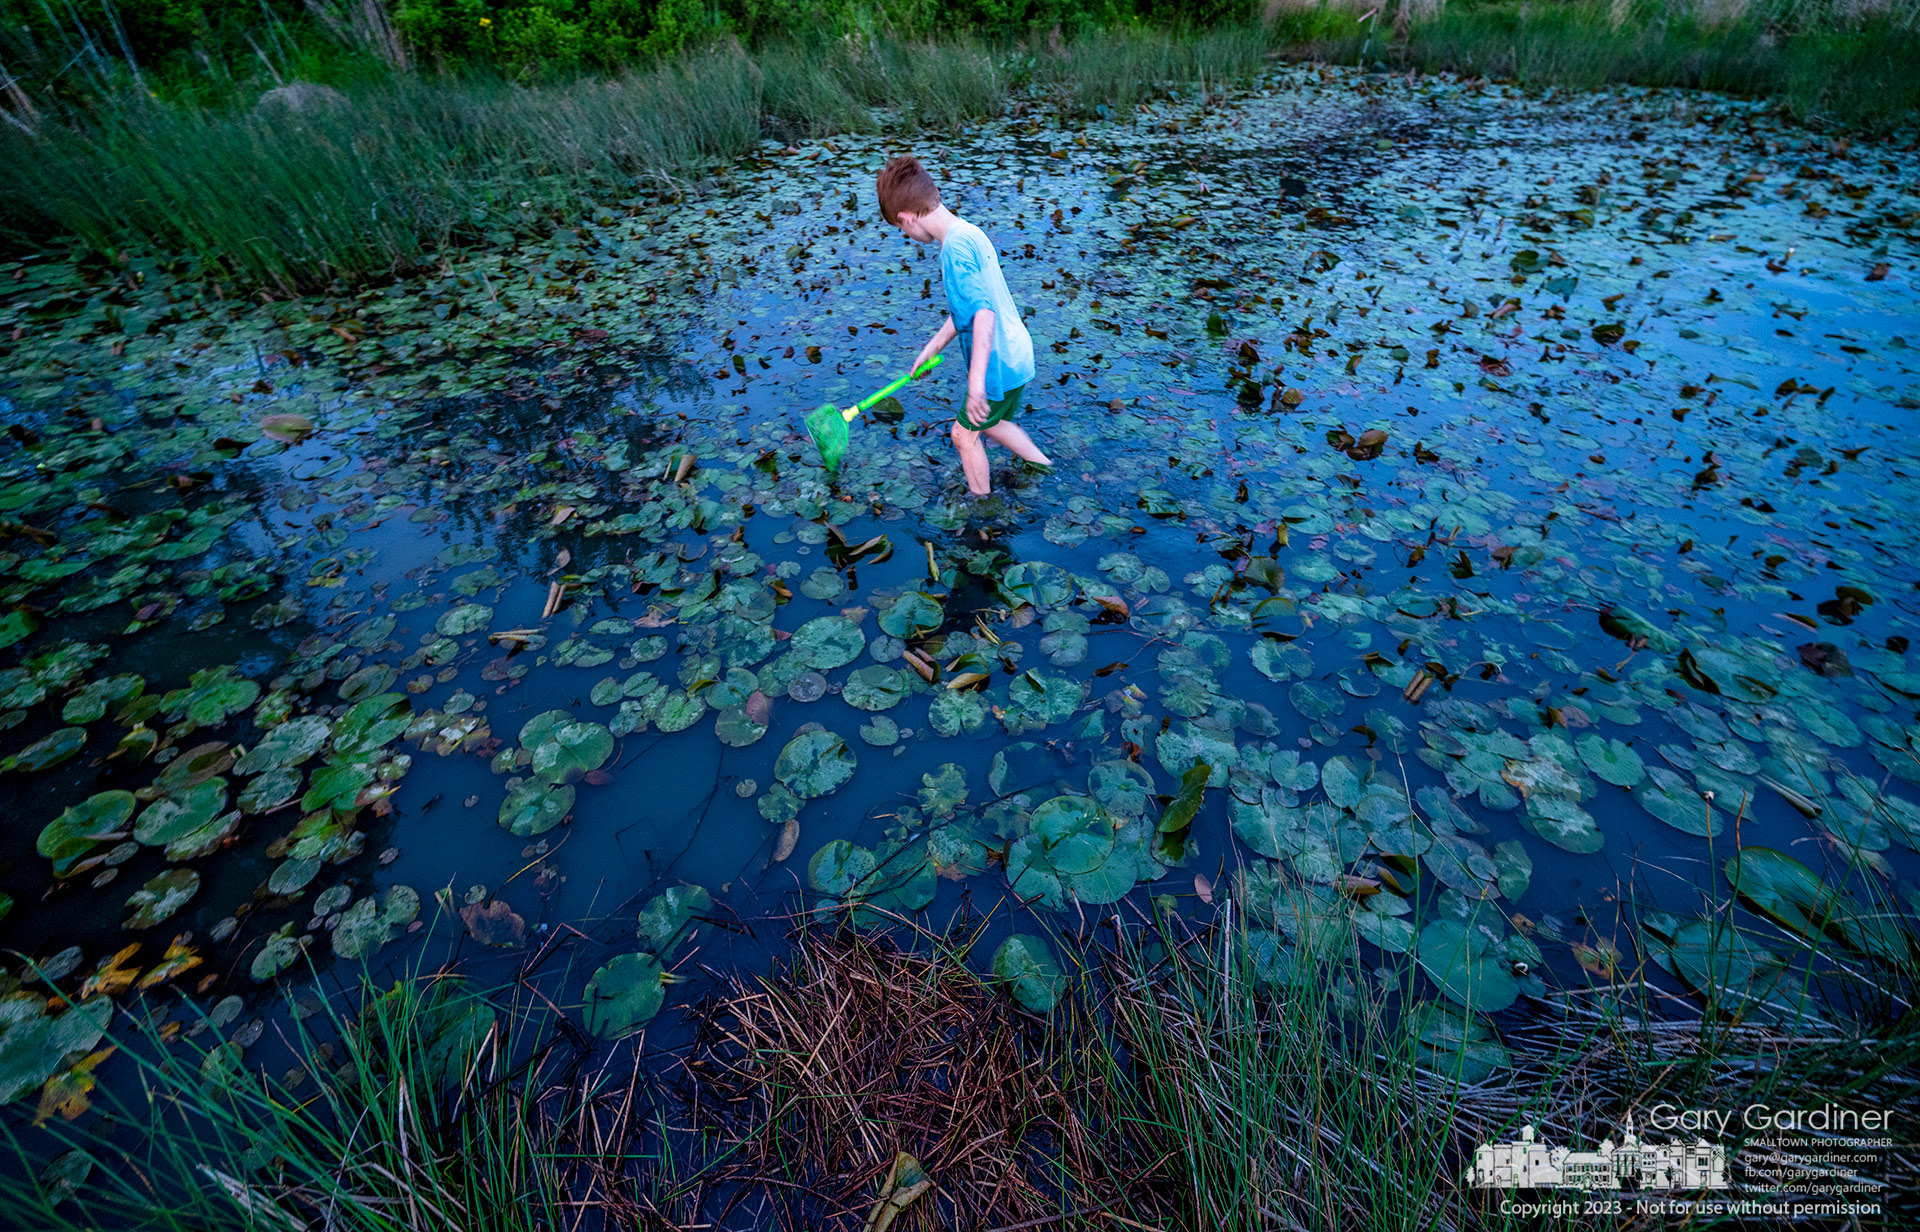 A youngster navigates his way through lily pads, aquatic plants, and mud searching for frogs, tadpoles, fishes, and snakes during Frog Friday at the Highlands wetlands. My Final Photo for May 19, 2023.